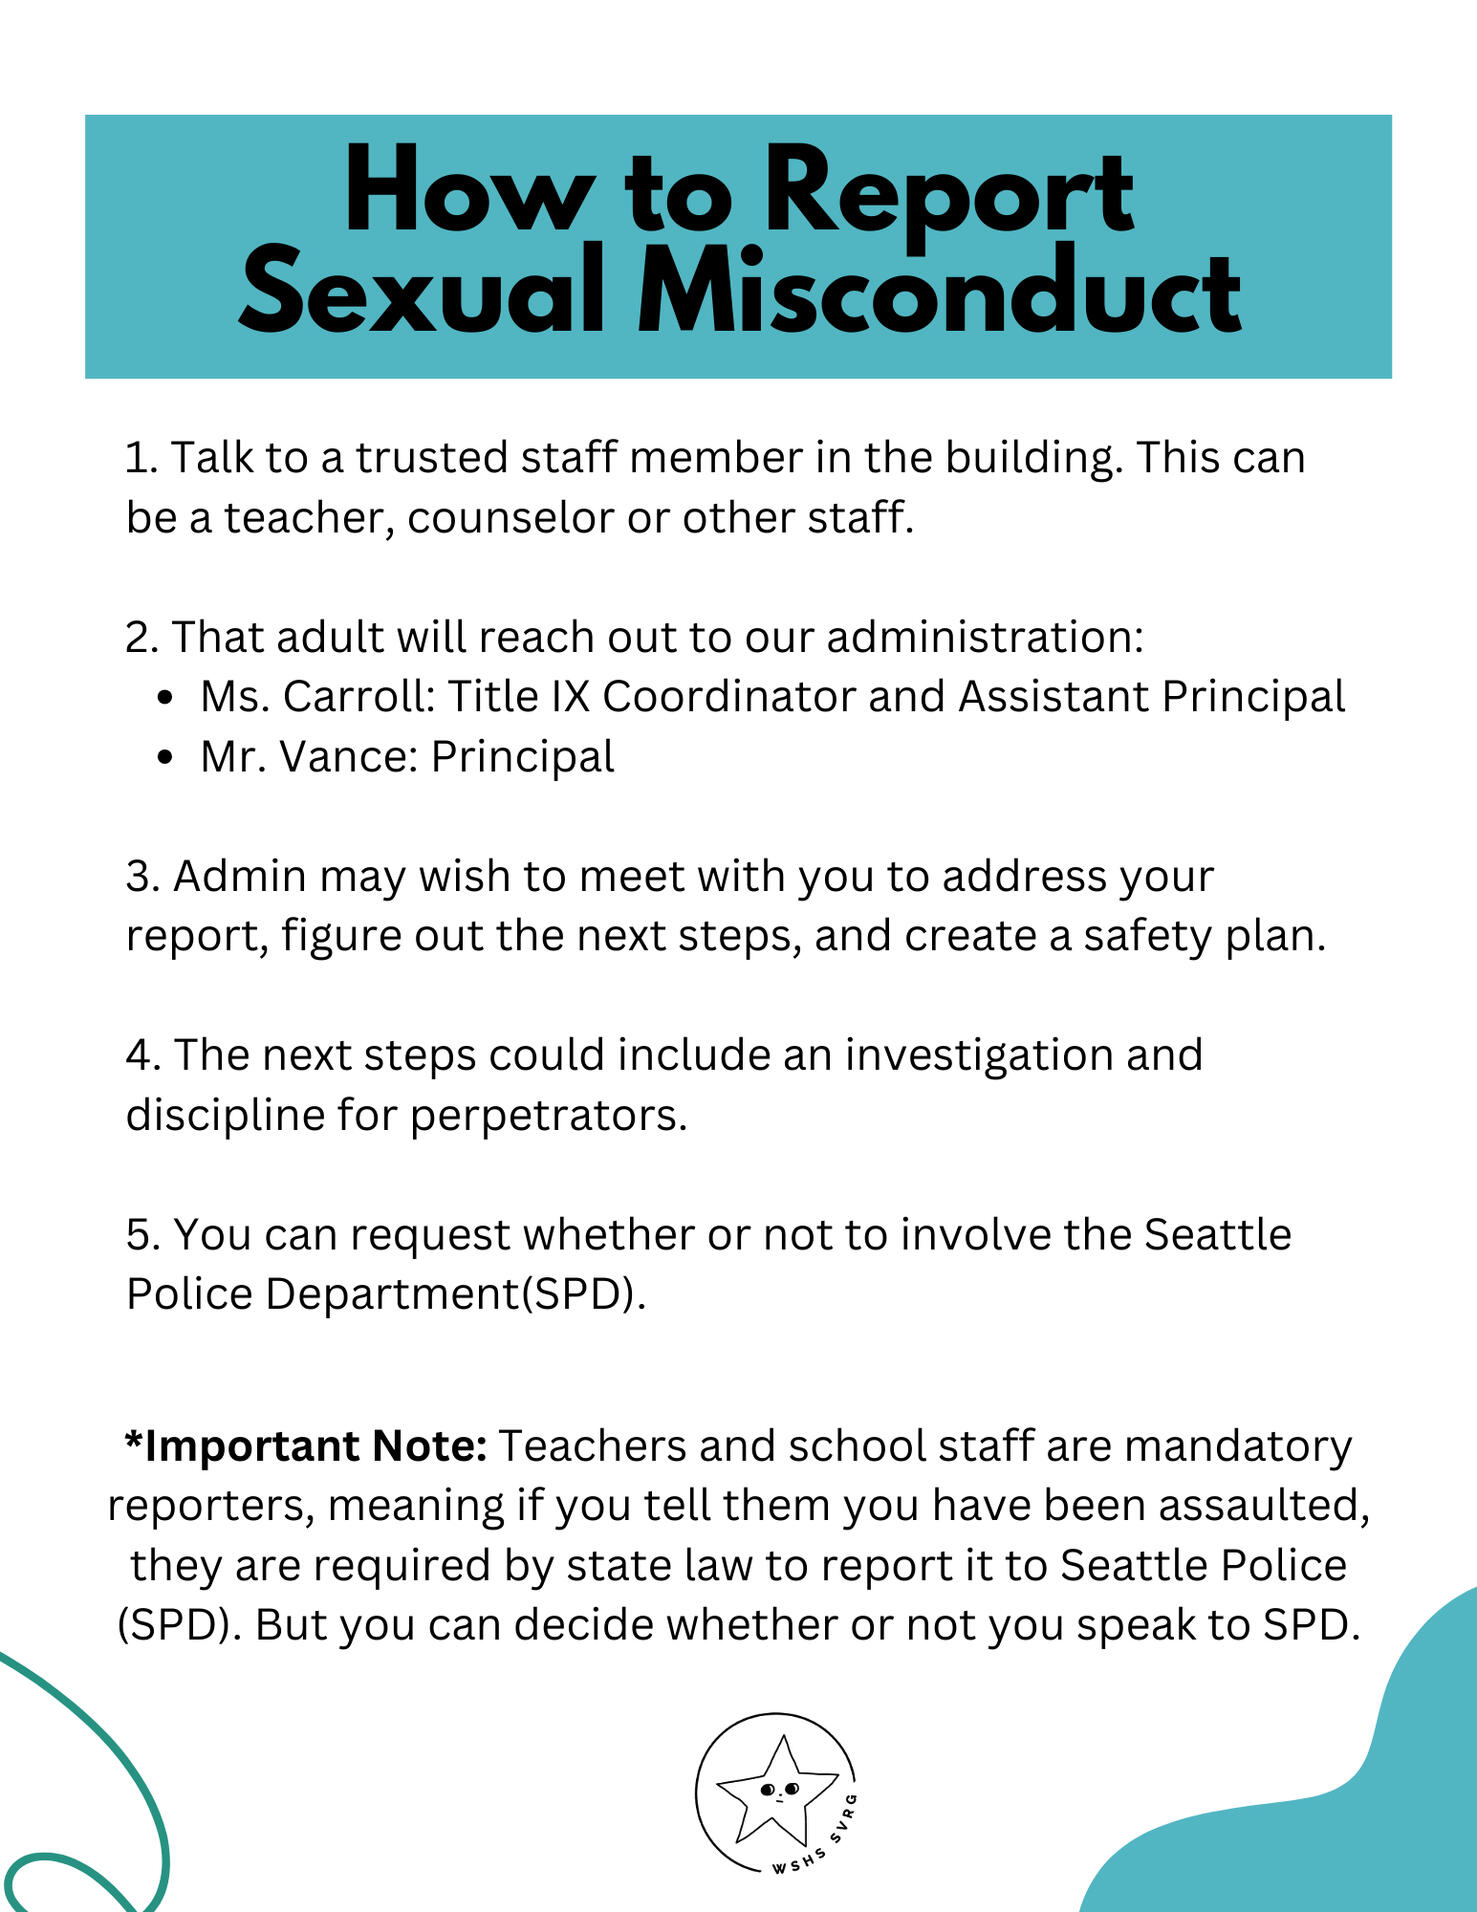 WSHS SVRG - How to Report Sexual Misconduct Poster